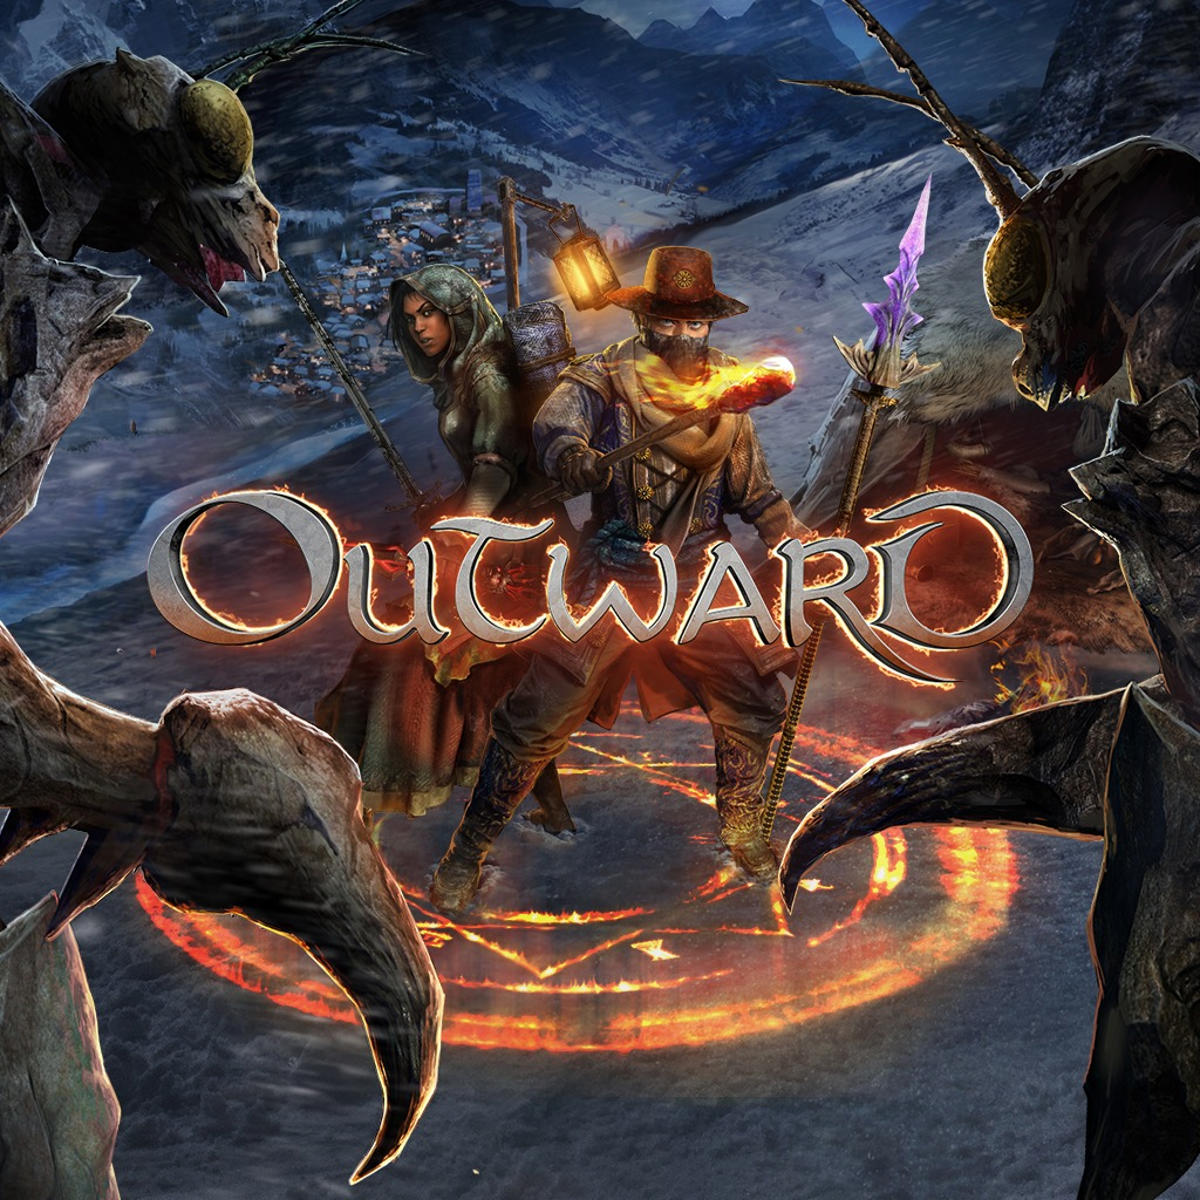 Outward Definitive Edition download the new version for mac